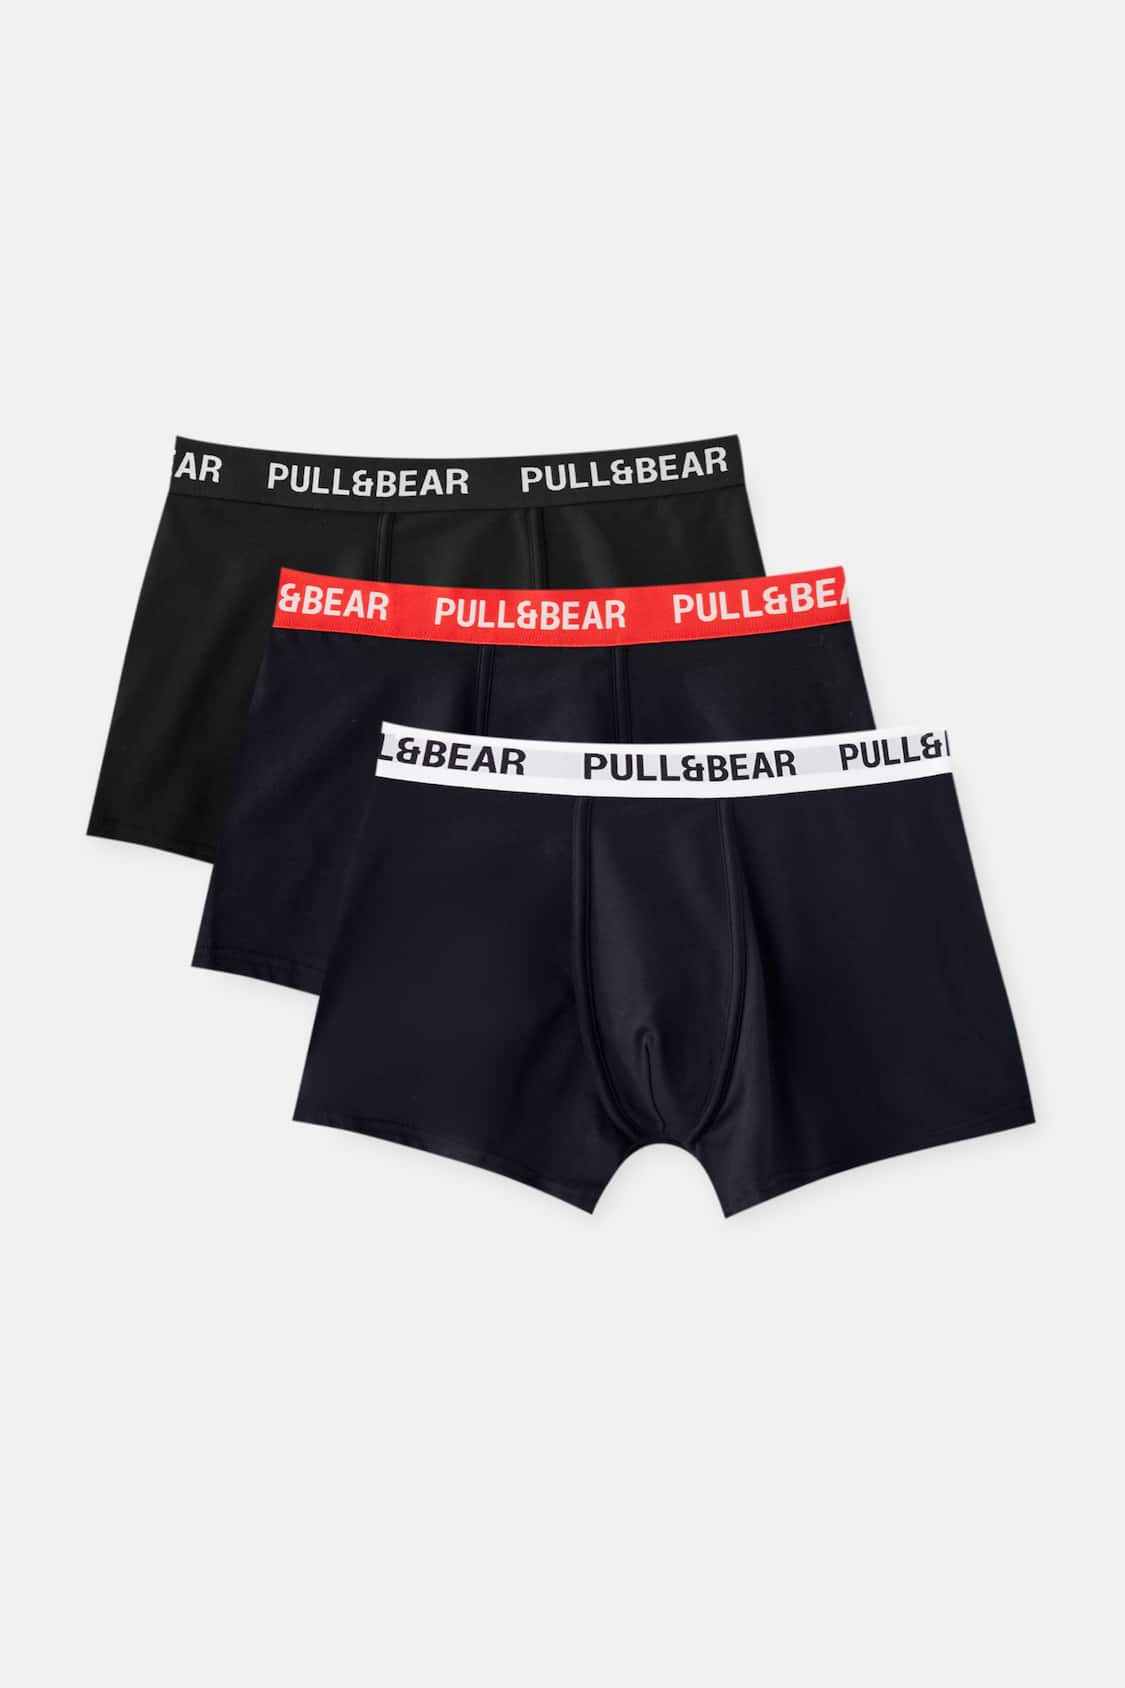 3-pack of boxers - PULL&BEAR